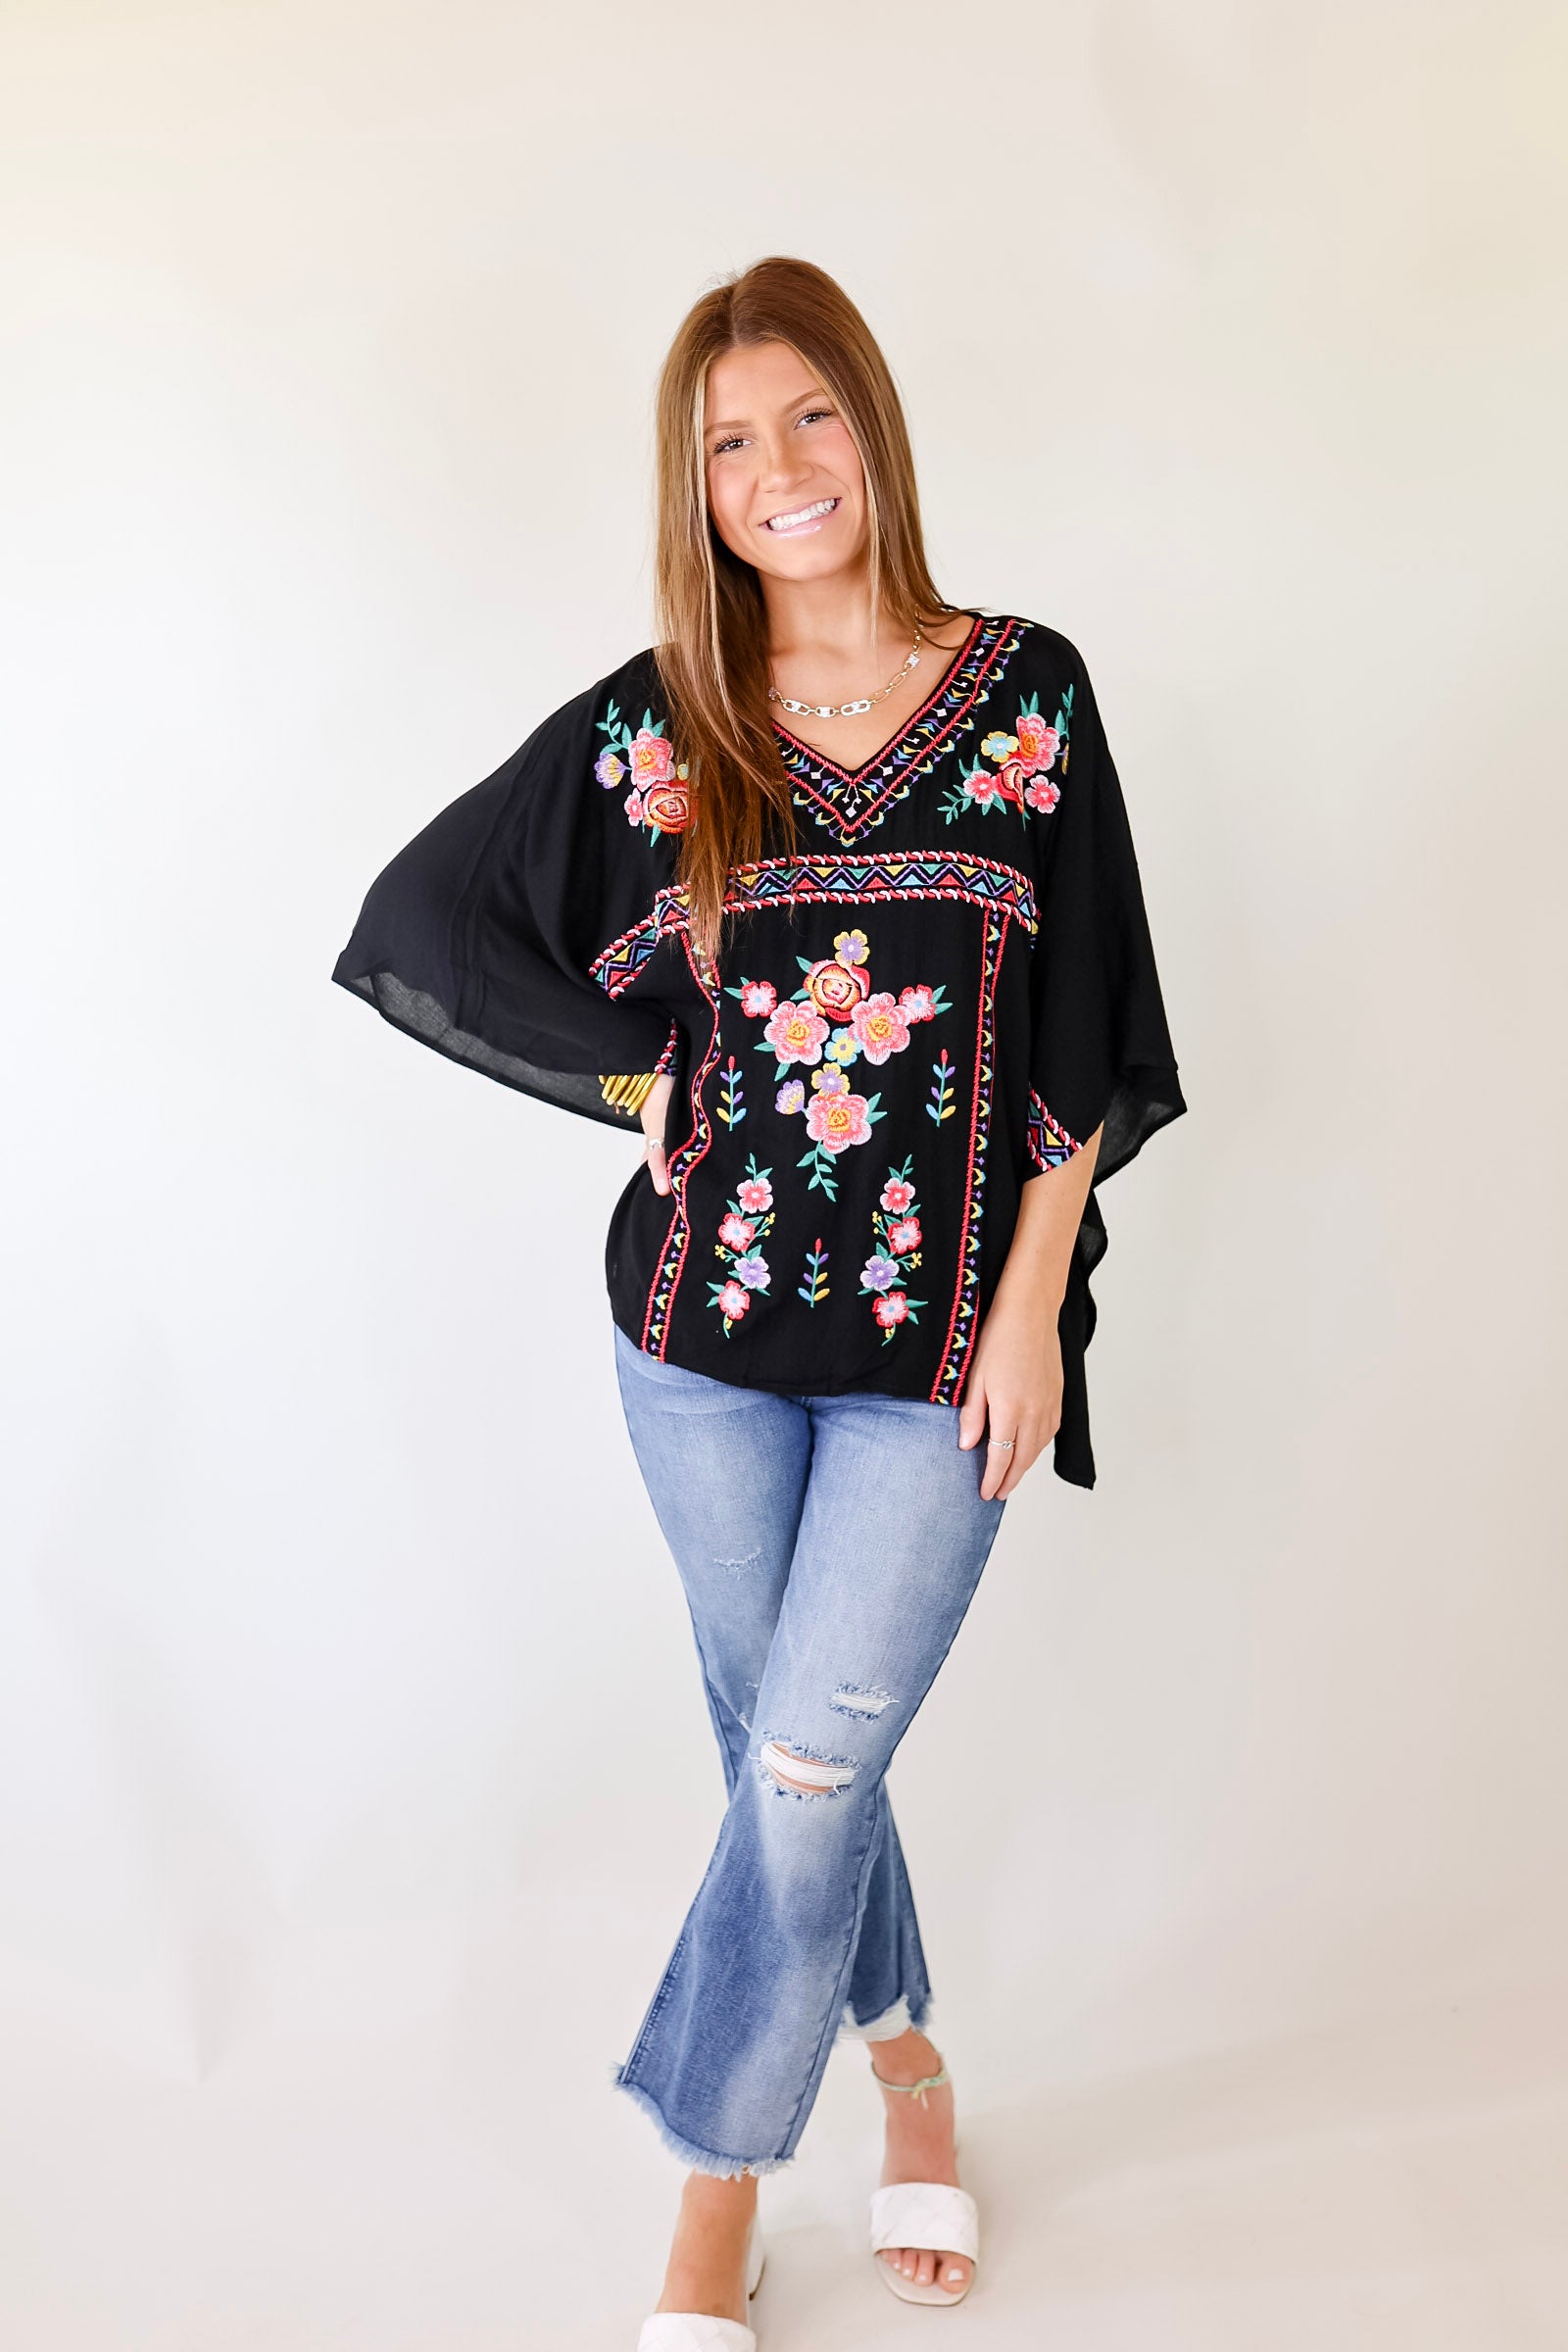 Beautiful Borders Half Sleeve V Neck Floral Embroidered Top in Black - Giddy Up Glamour Boutique